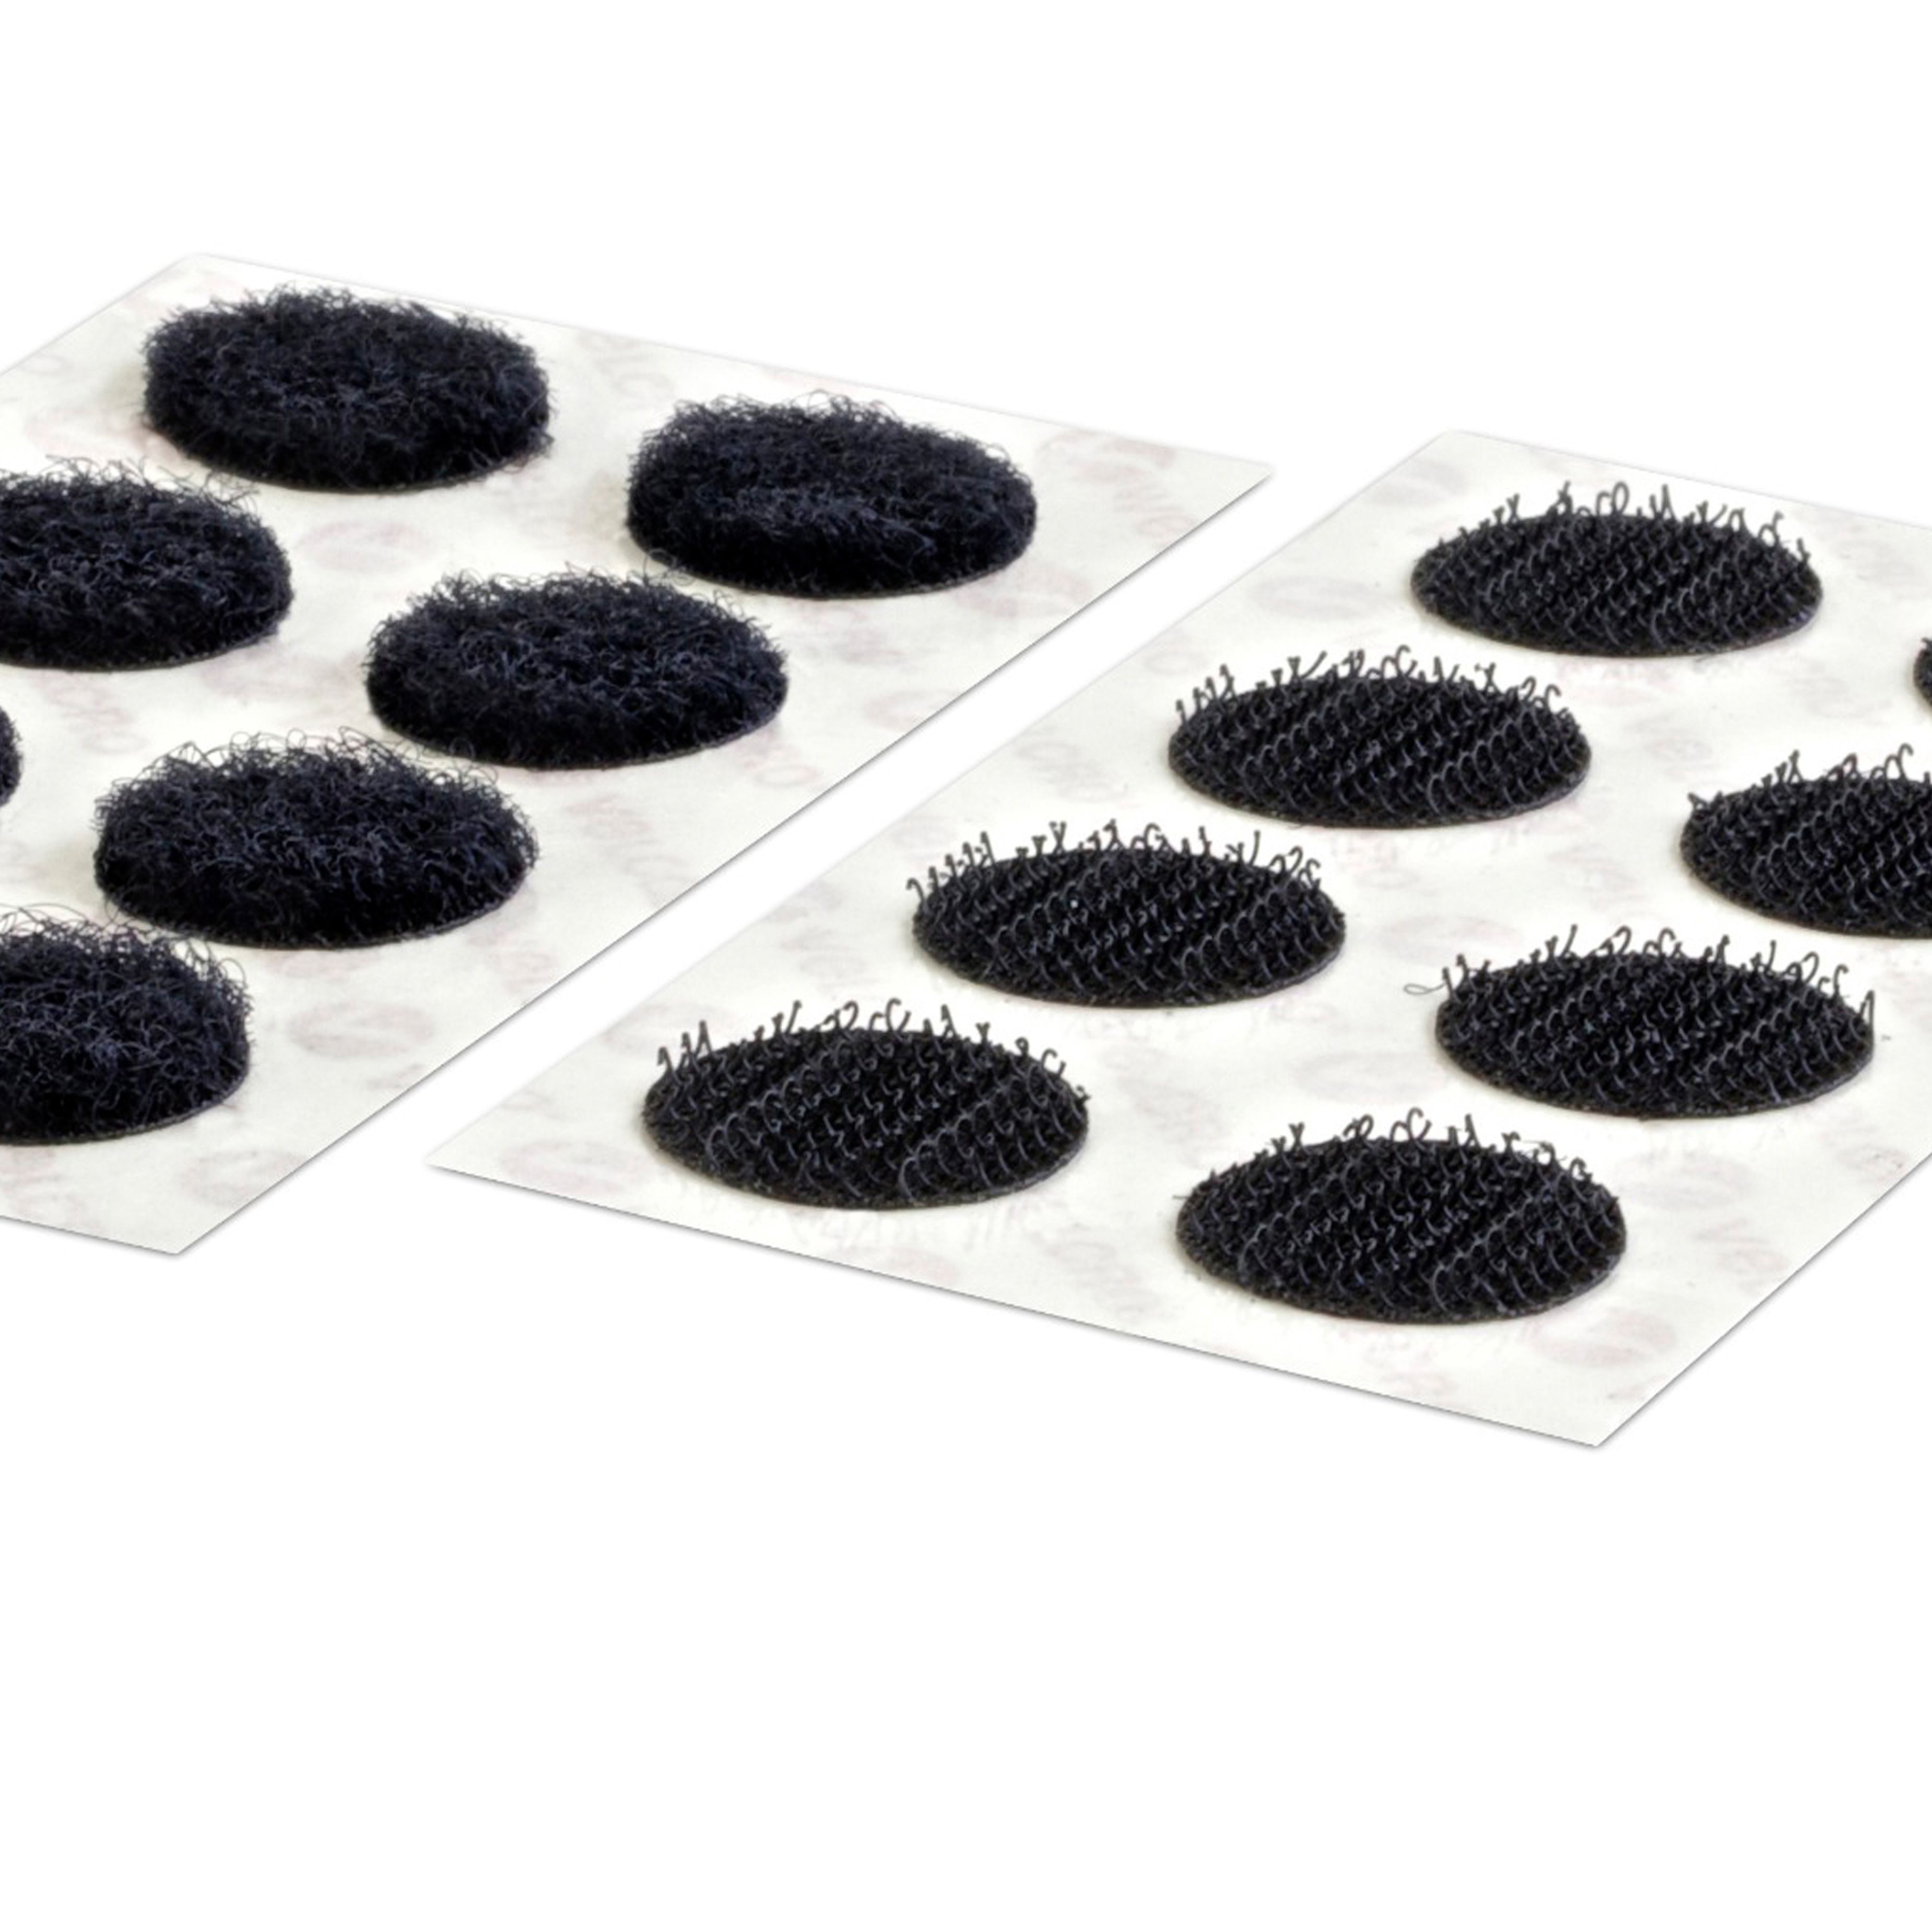 Heavy Duty Black Self Adhesive Coins Stick On Industrial Dots 45mm